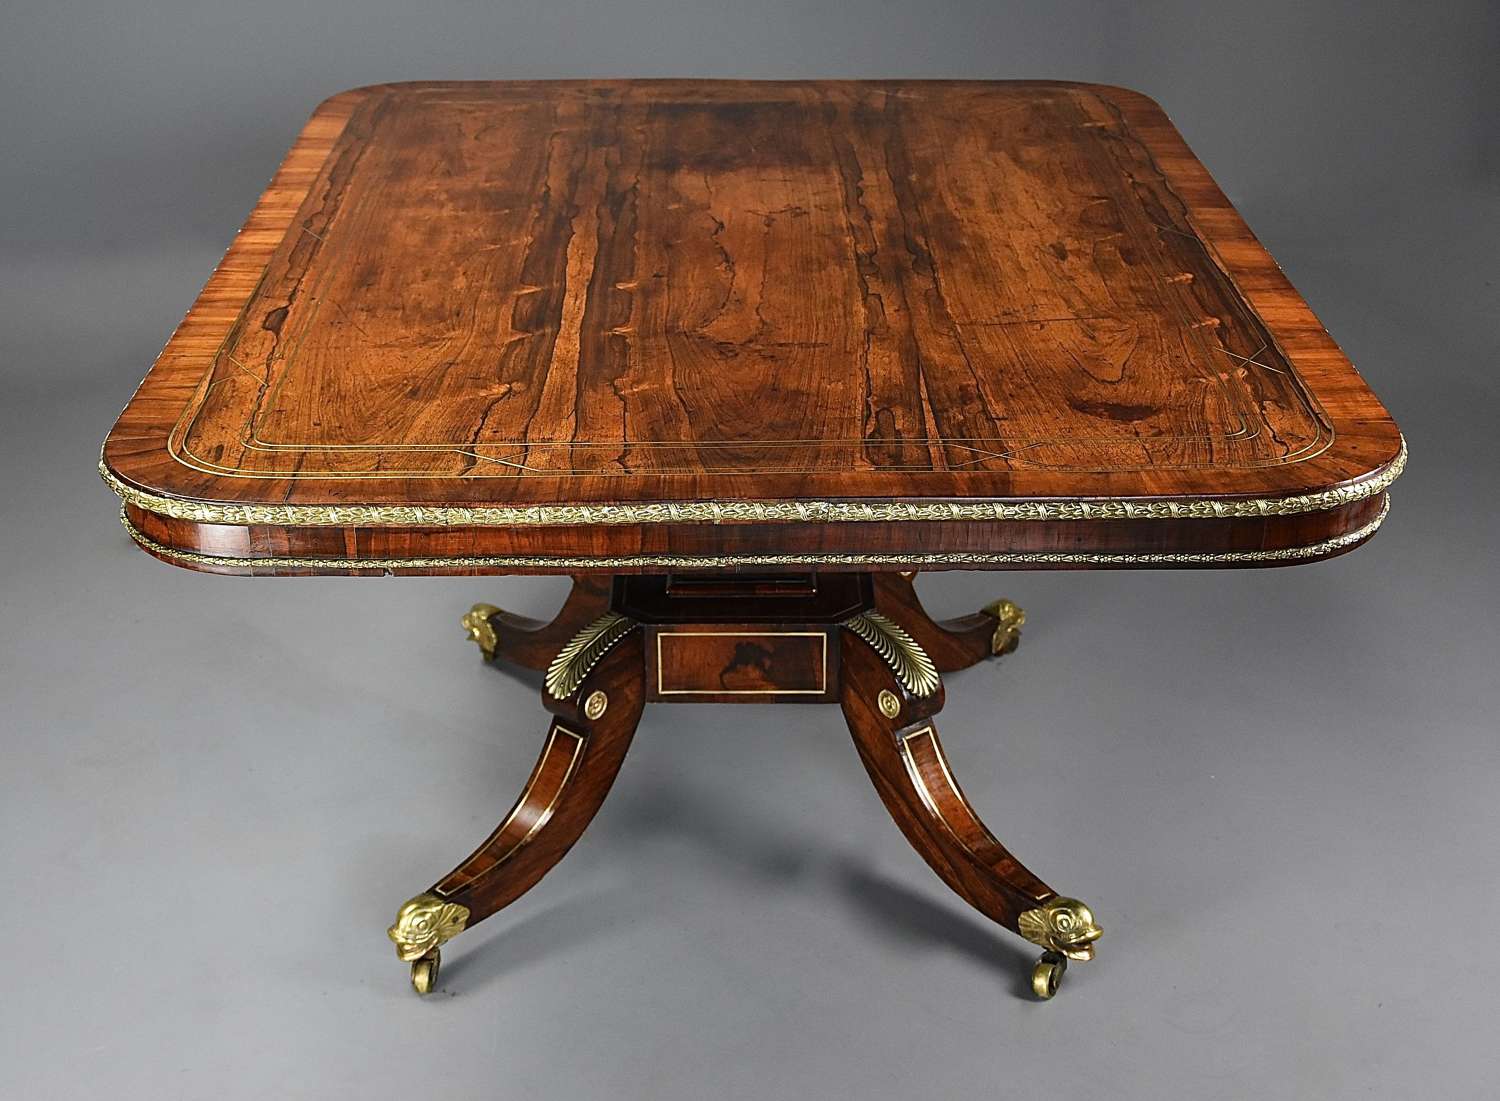 Fine quality Regency rosewood breakfast table of exceptional patina